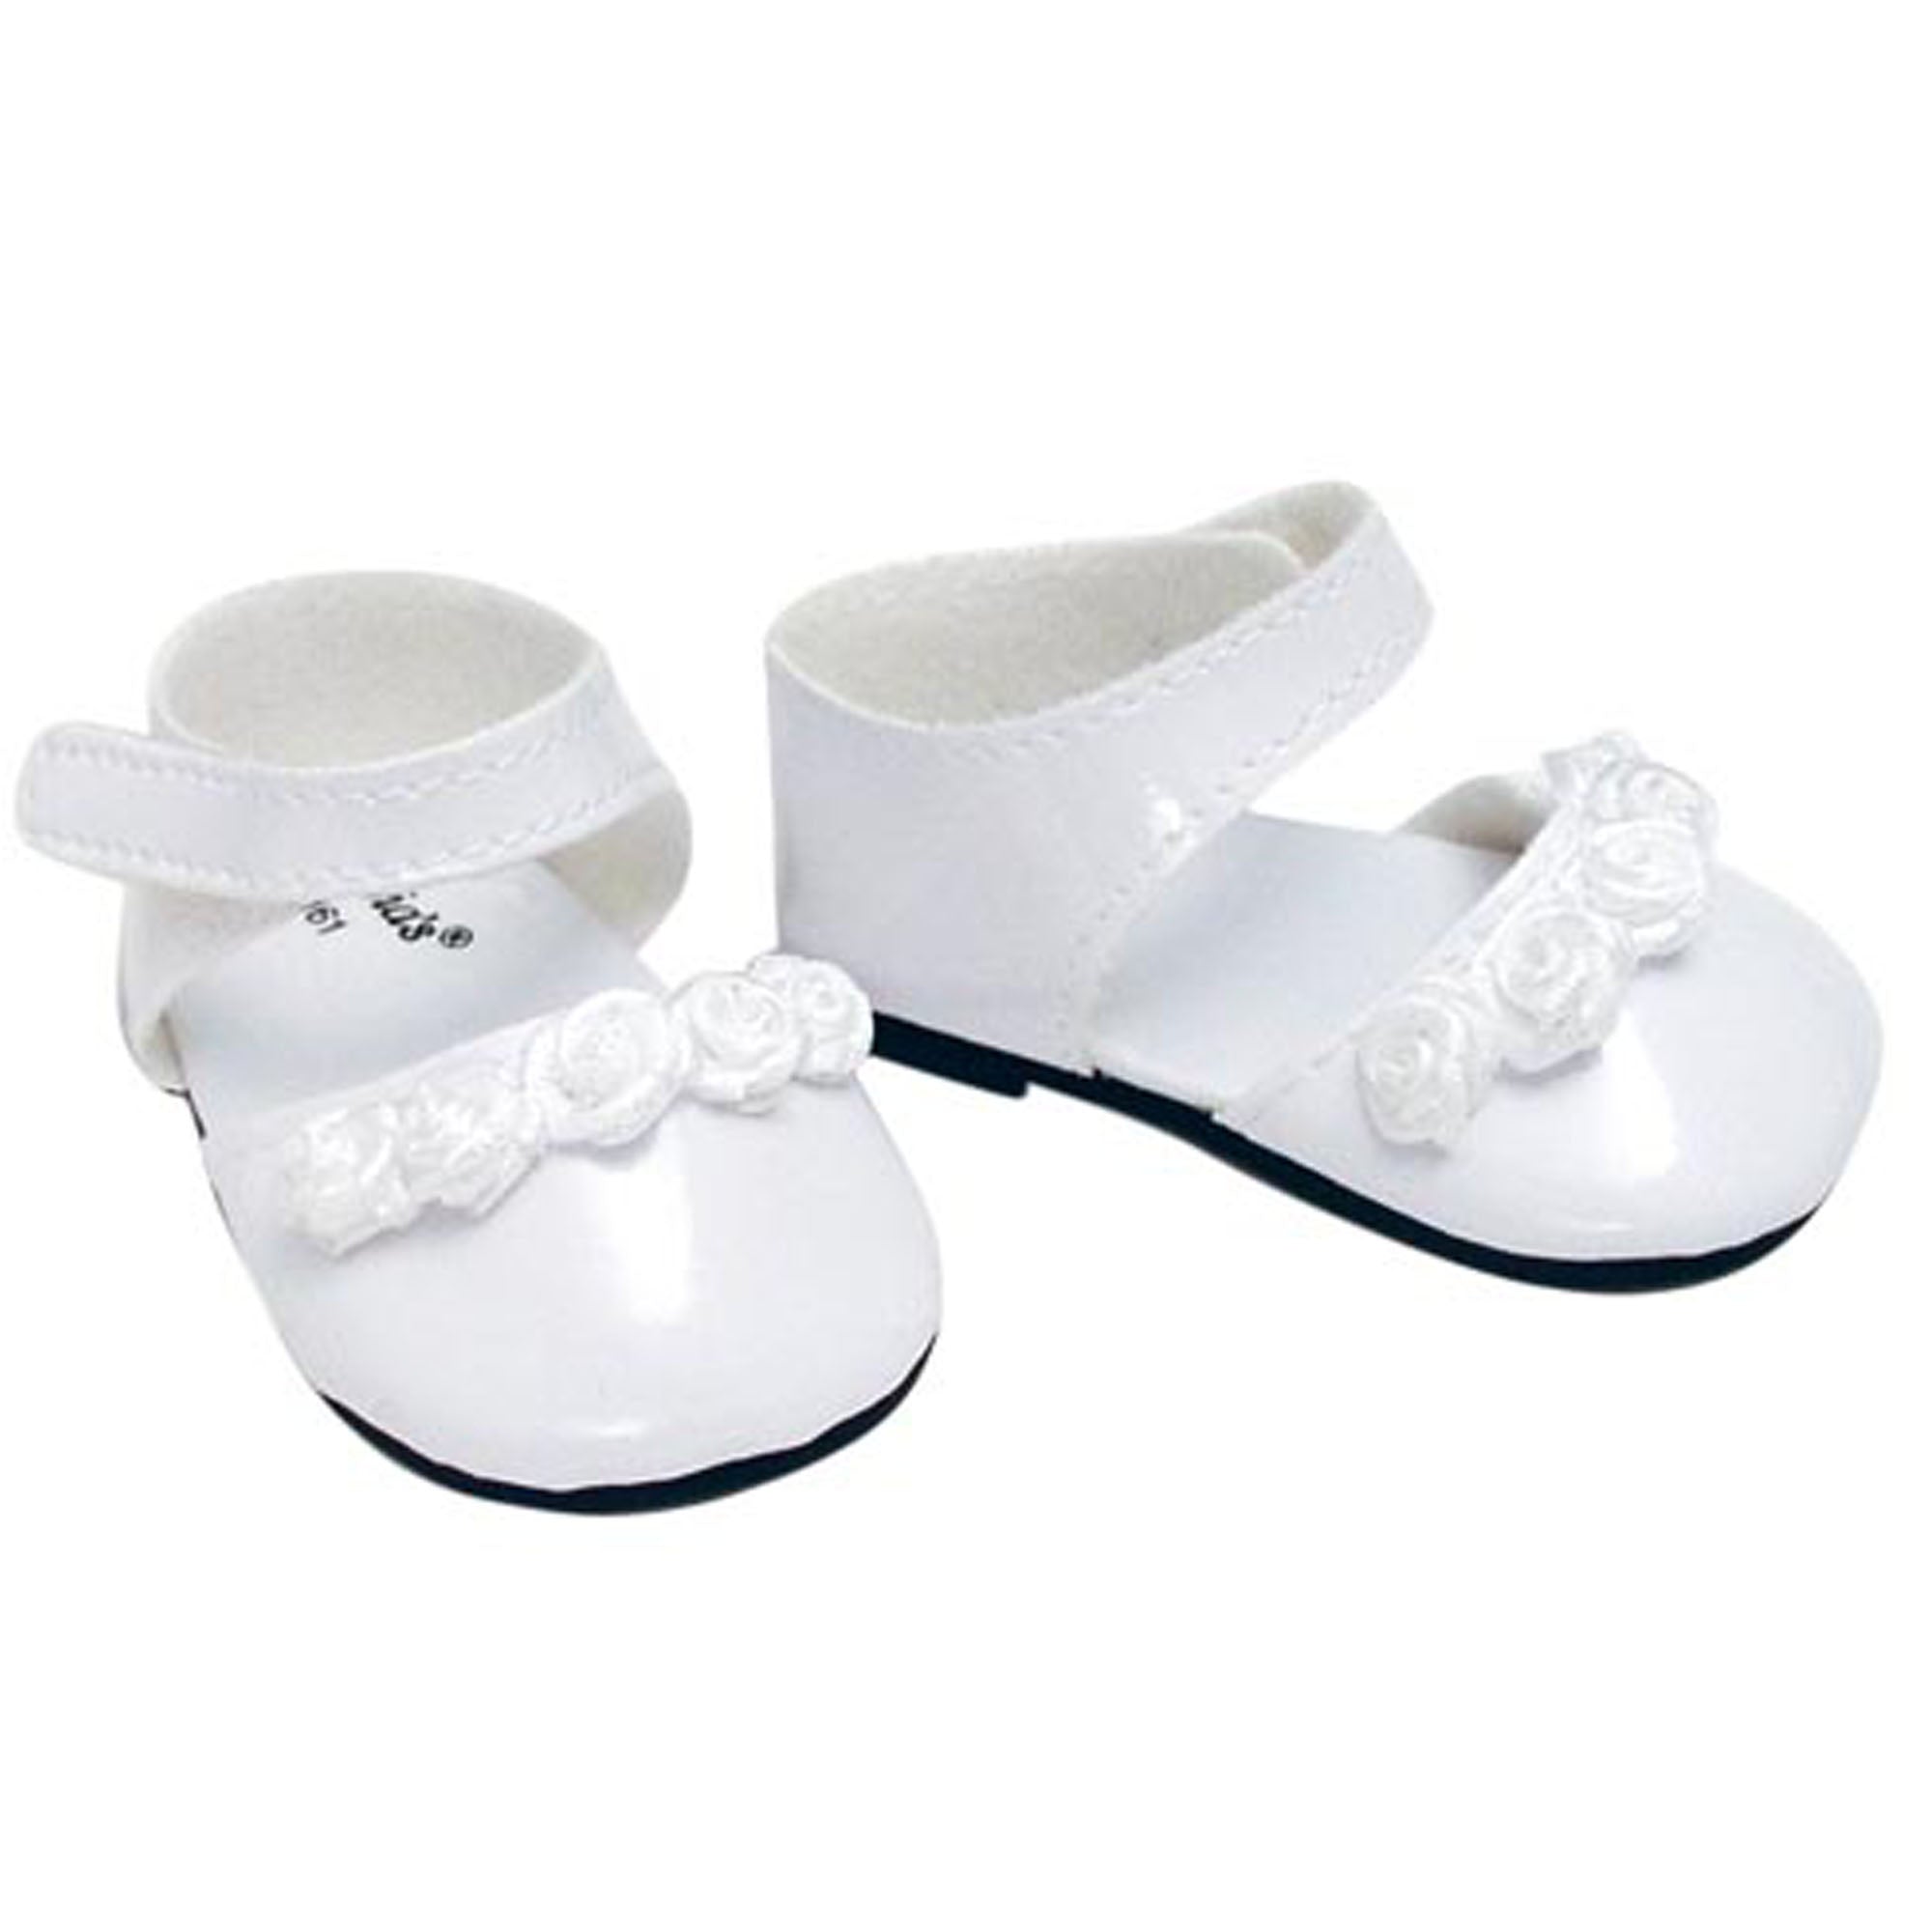 Sophia's Patent Leather Dress Shoes for 18" Dolls, White